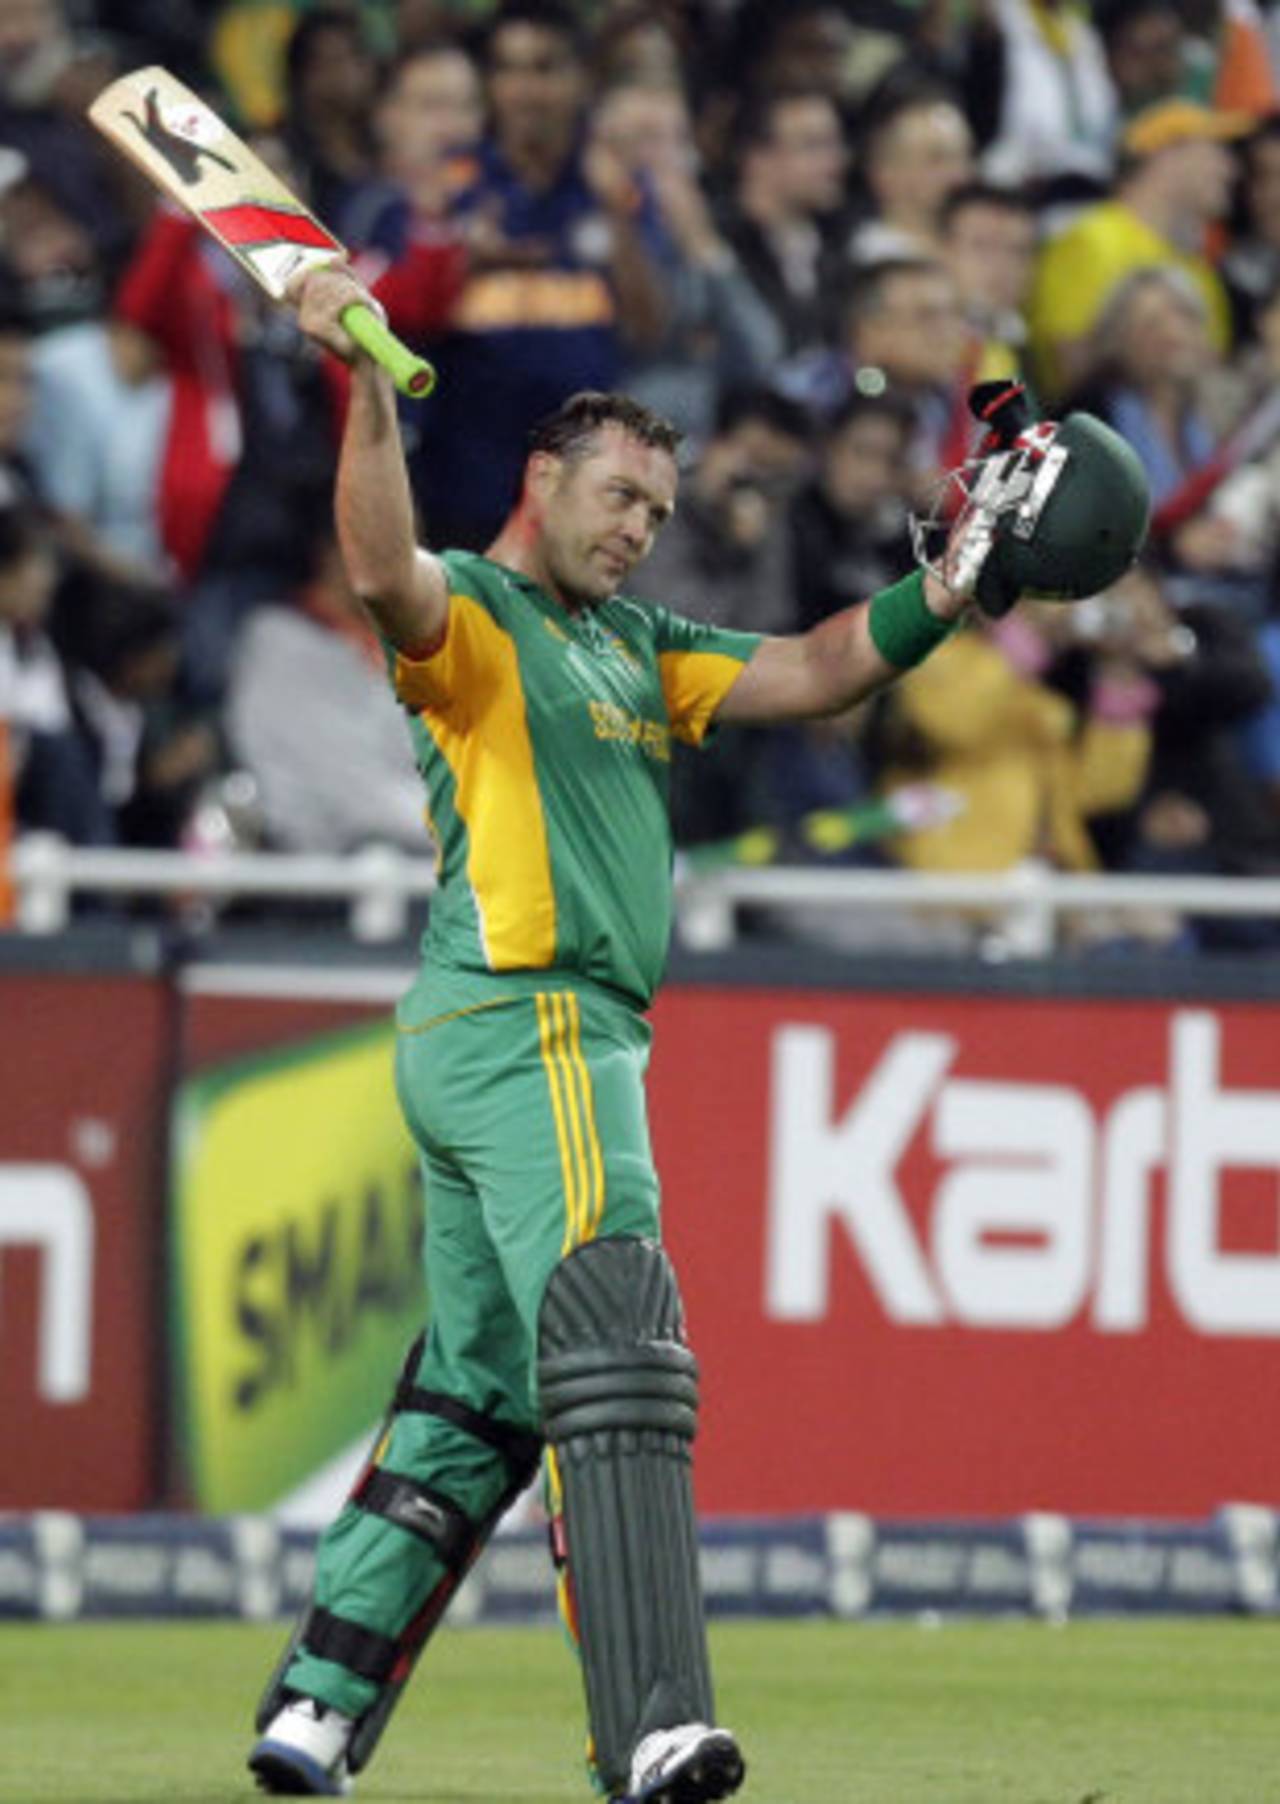 Jacques Kallis has served South African cricket as a colossus of courage and class. This match was neither of those things. It was crass.&nbsp;&nbsp;&bull;&nbsp;&nbsp;Associated Press